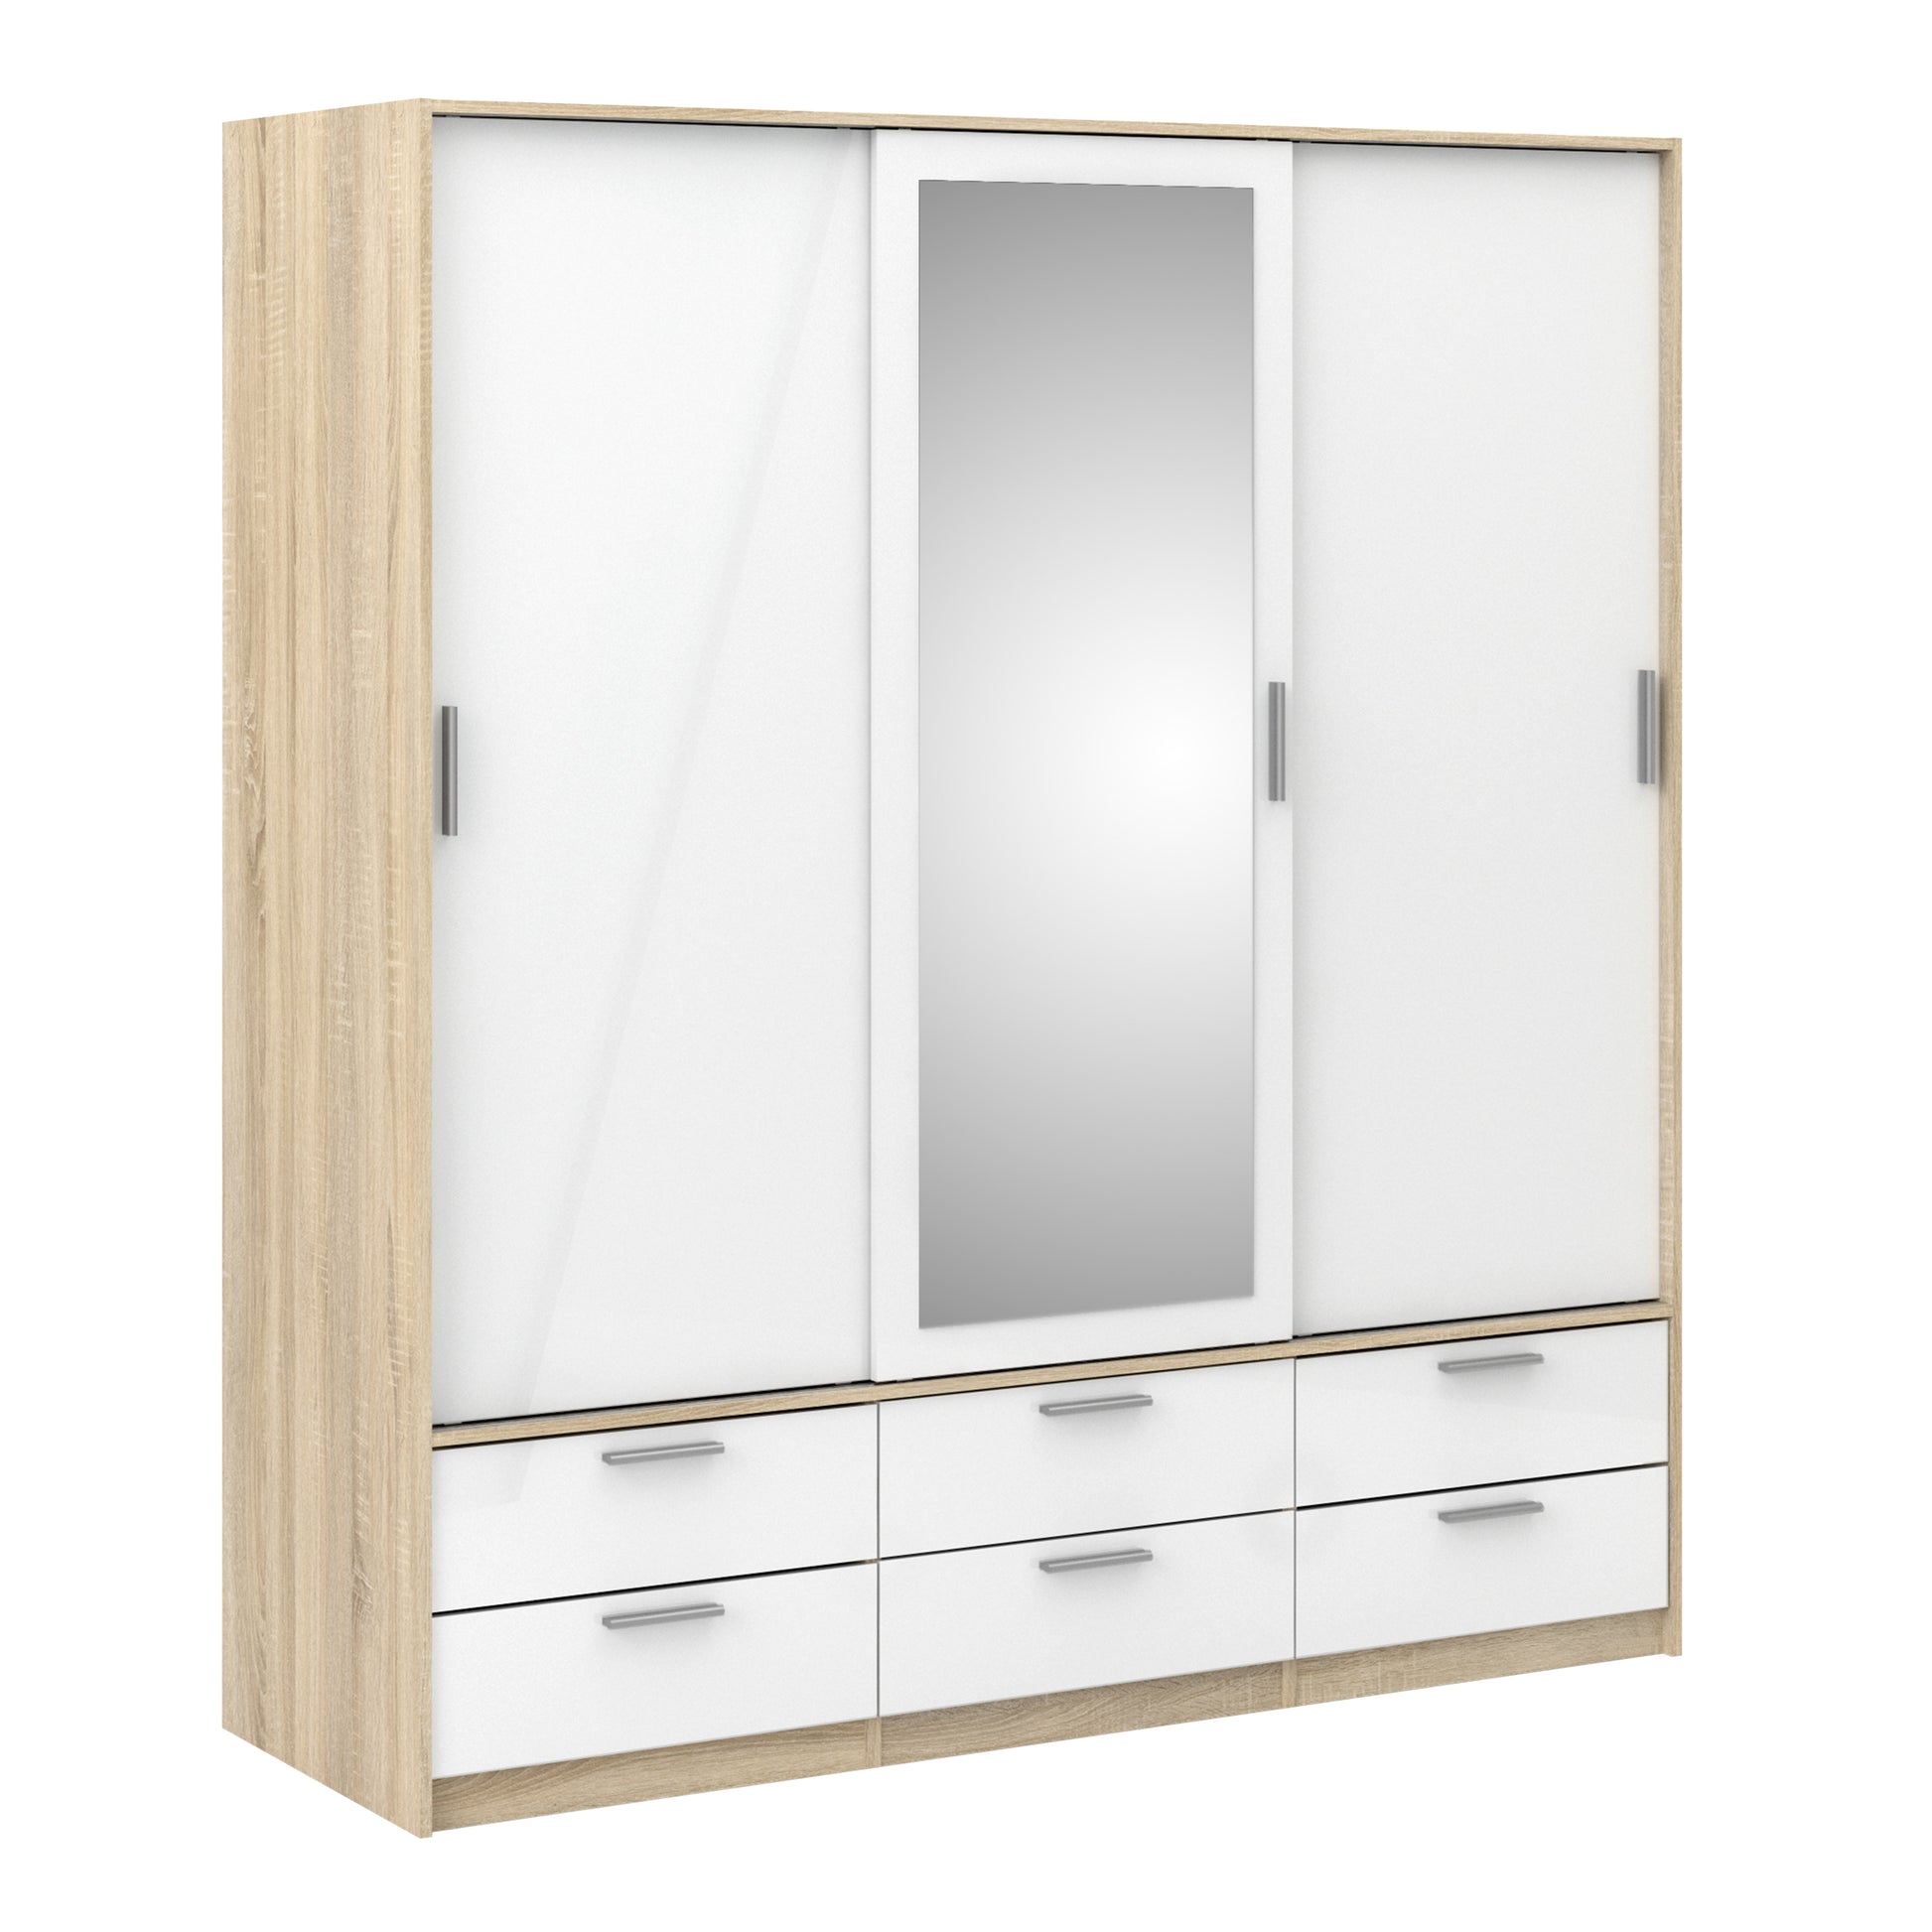 Line Wardrobe - 3 Doors 6 Drawers in Oak with White High Gloss